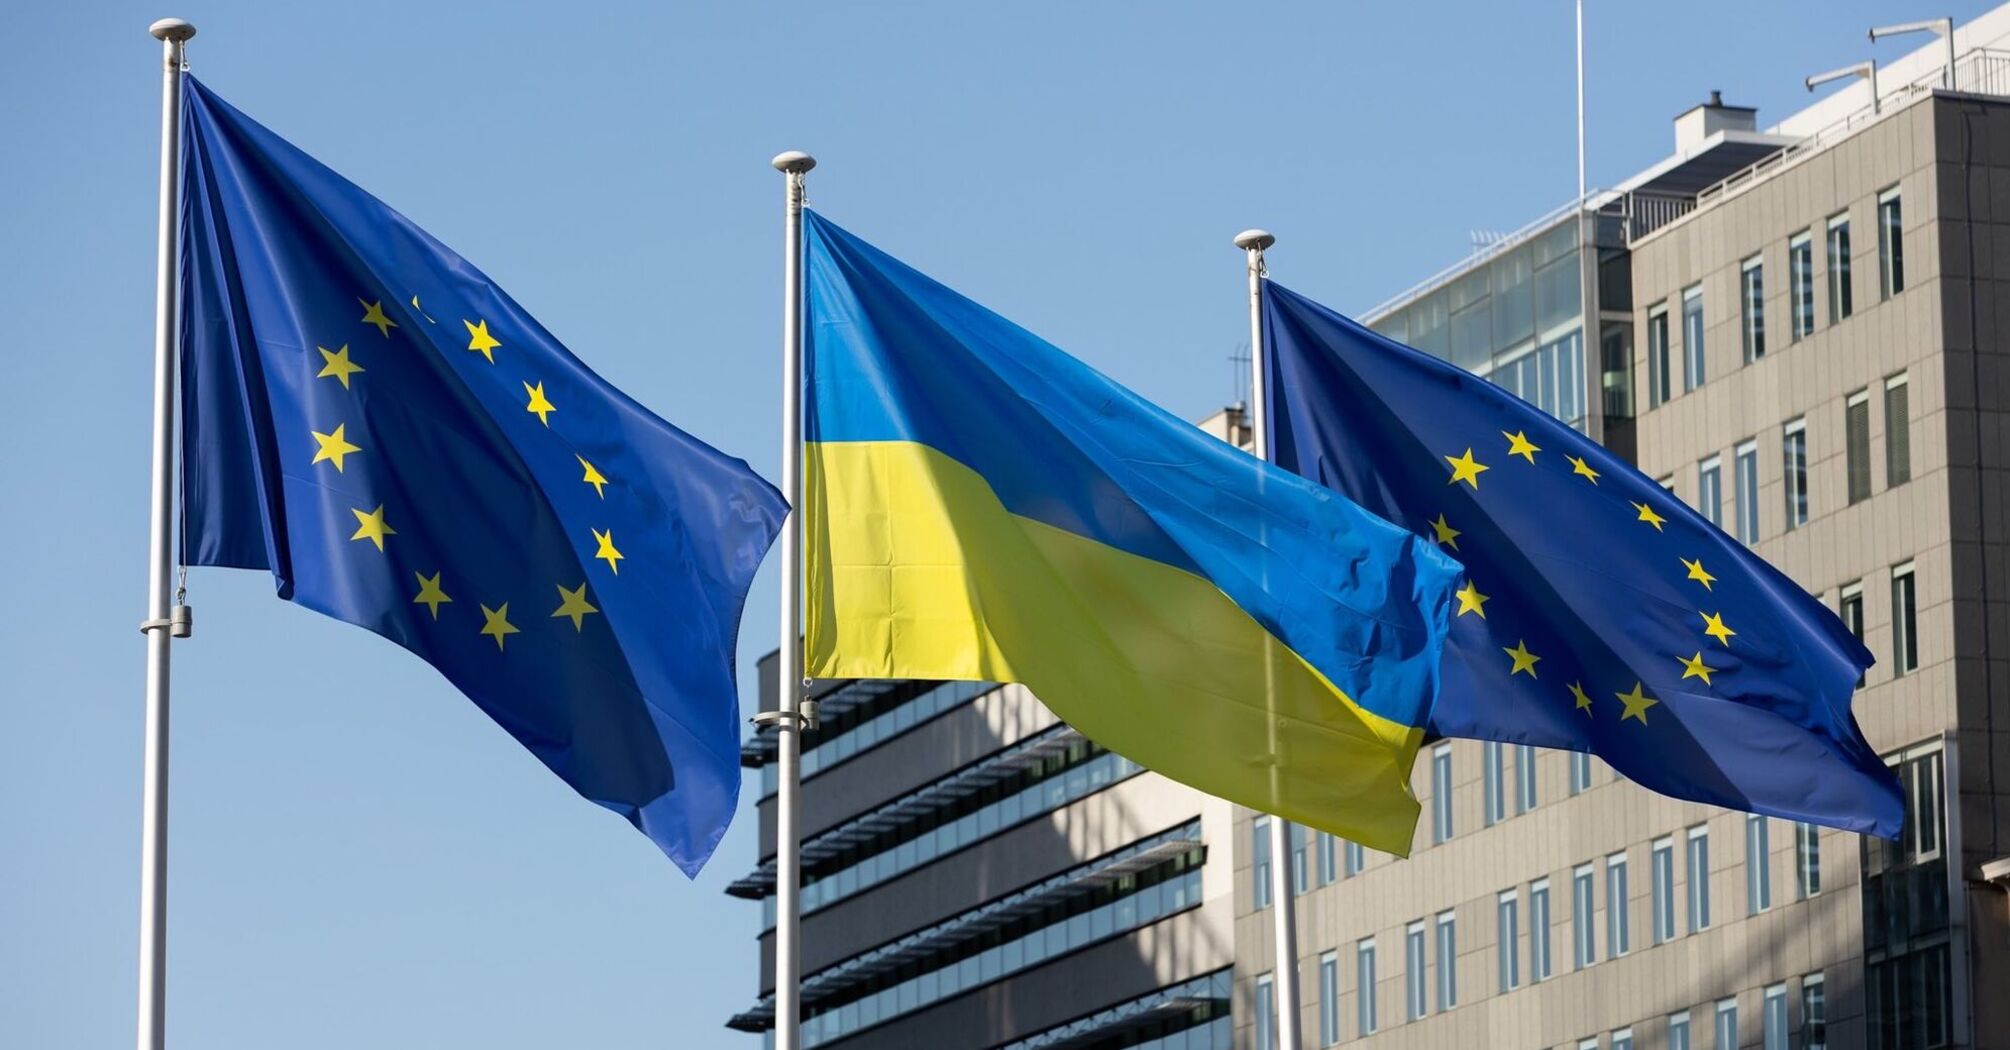 The parameters that Ukraine must meet for EU assistance have been announced